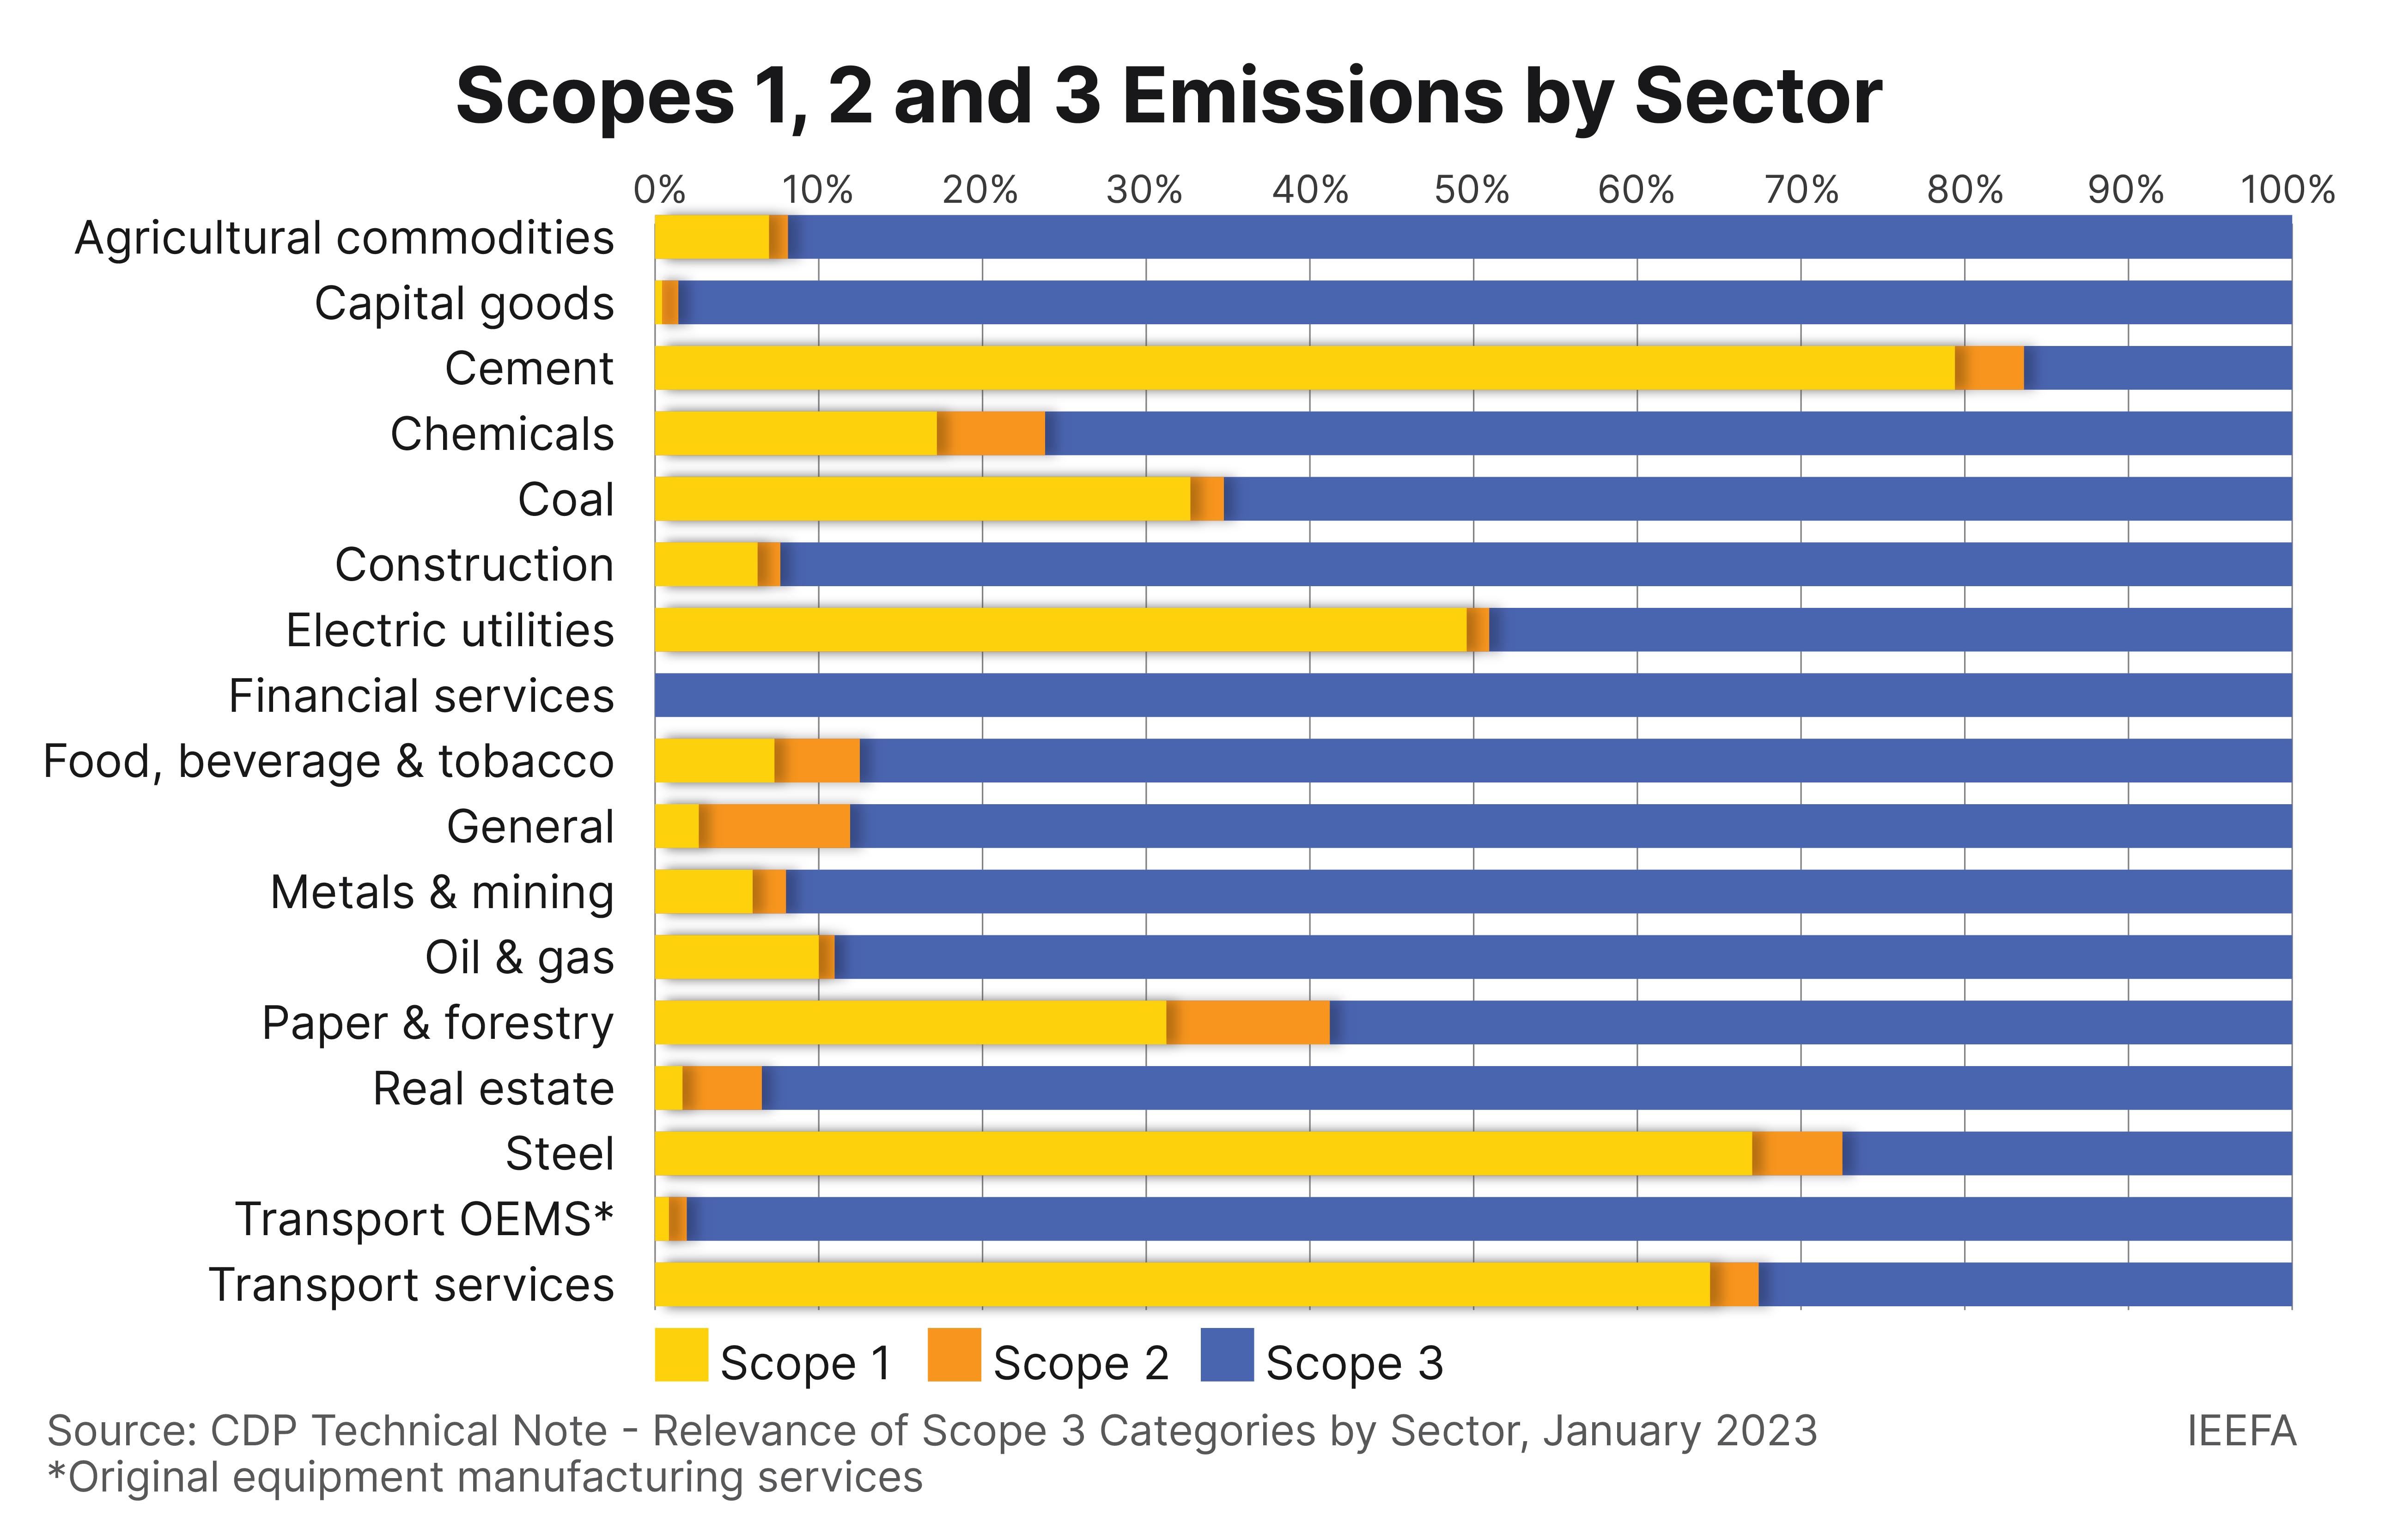 IEEFA Chart Scope 1 2 3 Emissions by Sector